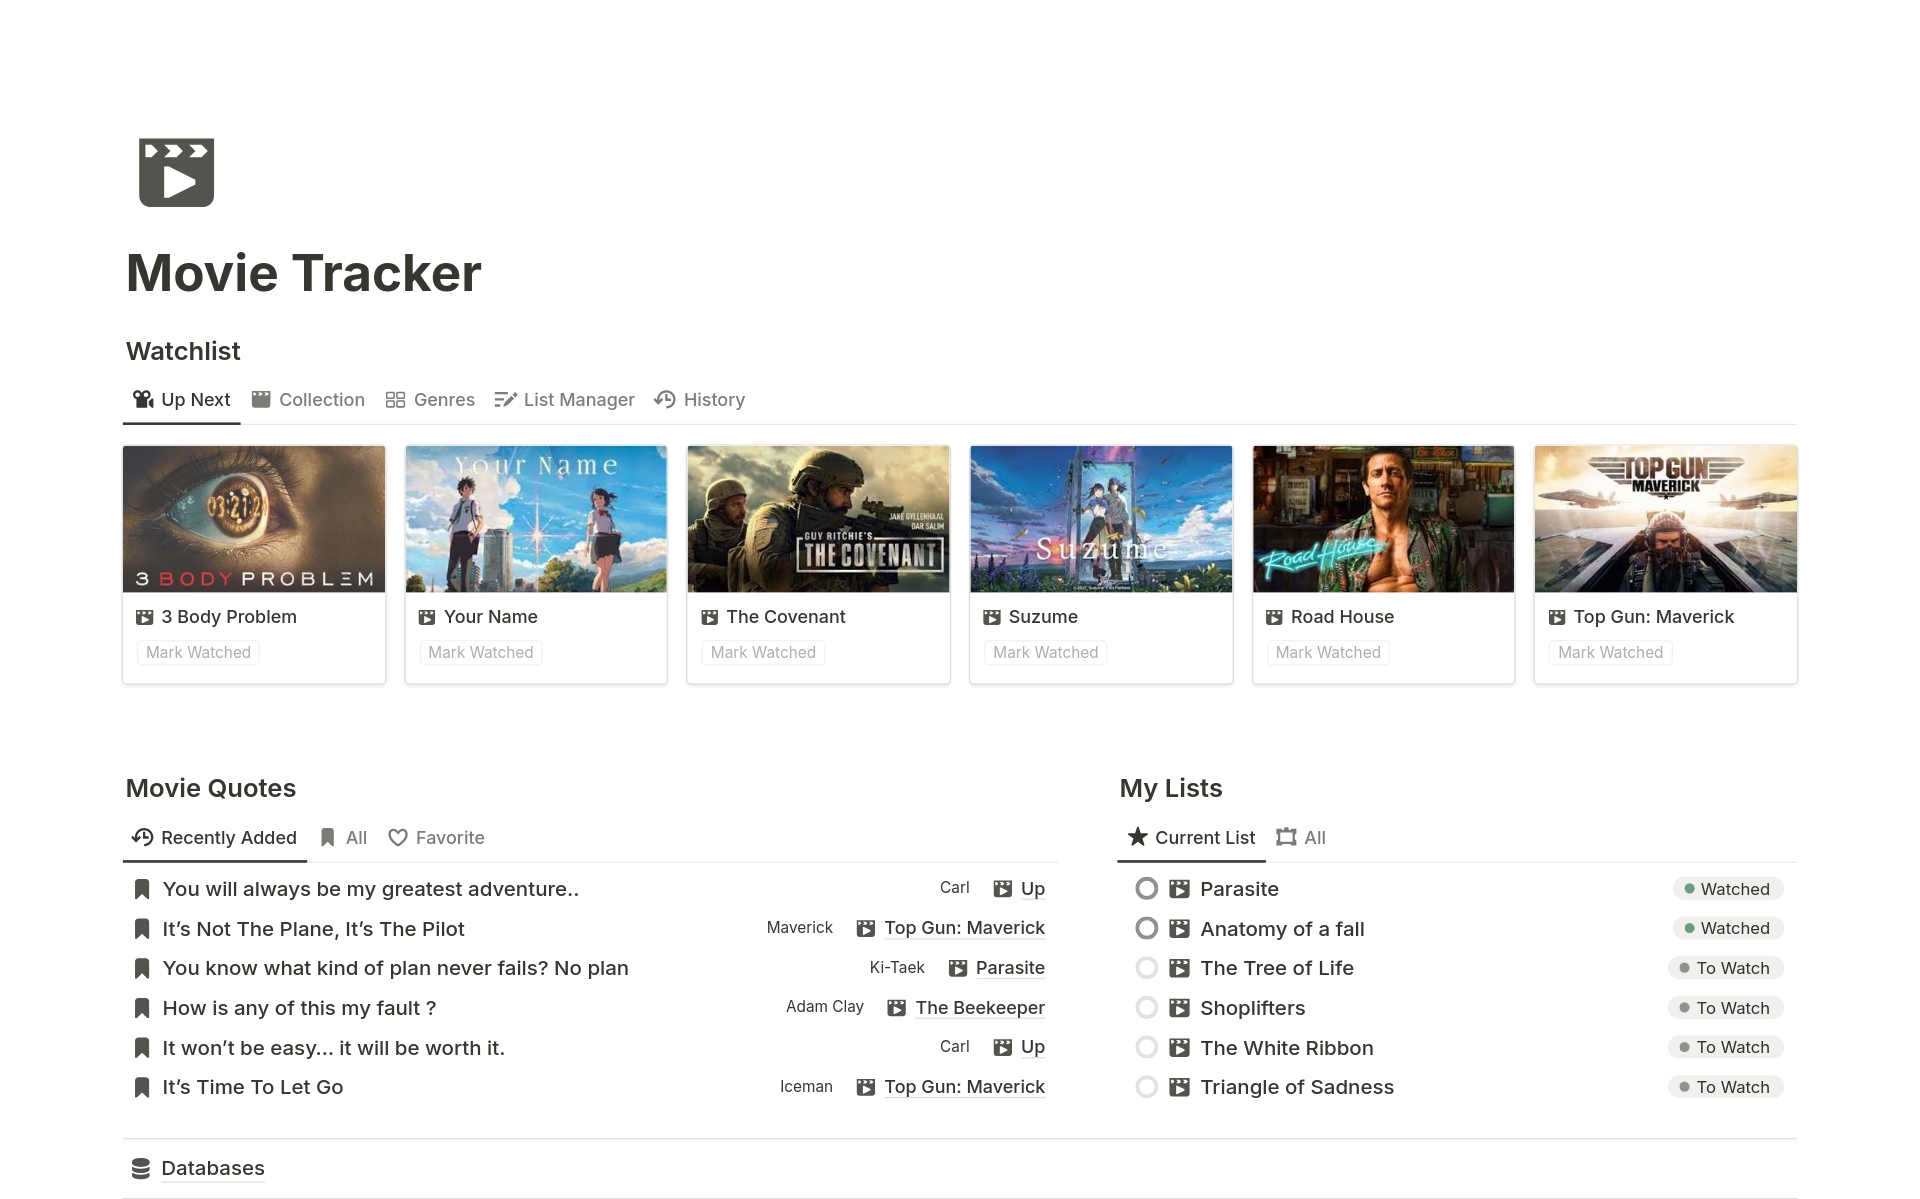 The perfect Watchlist Tracker solution for all movie enthusiasts!